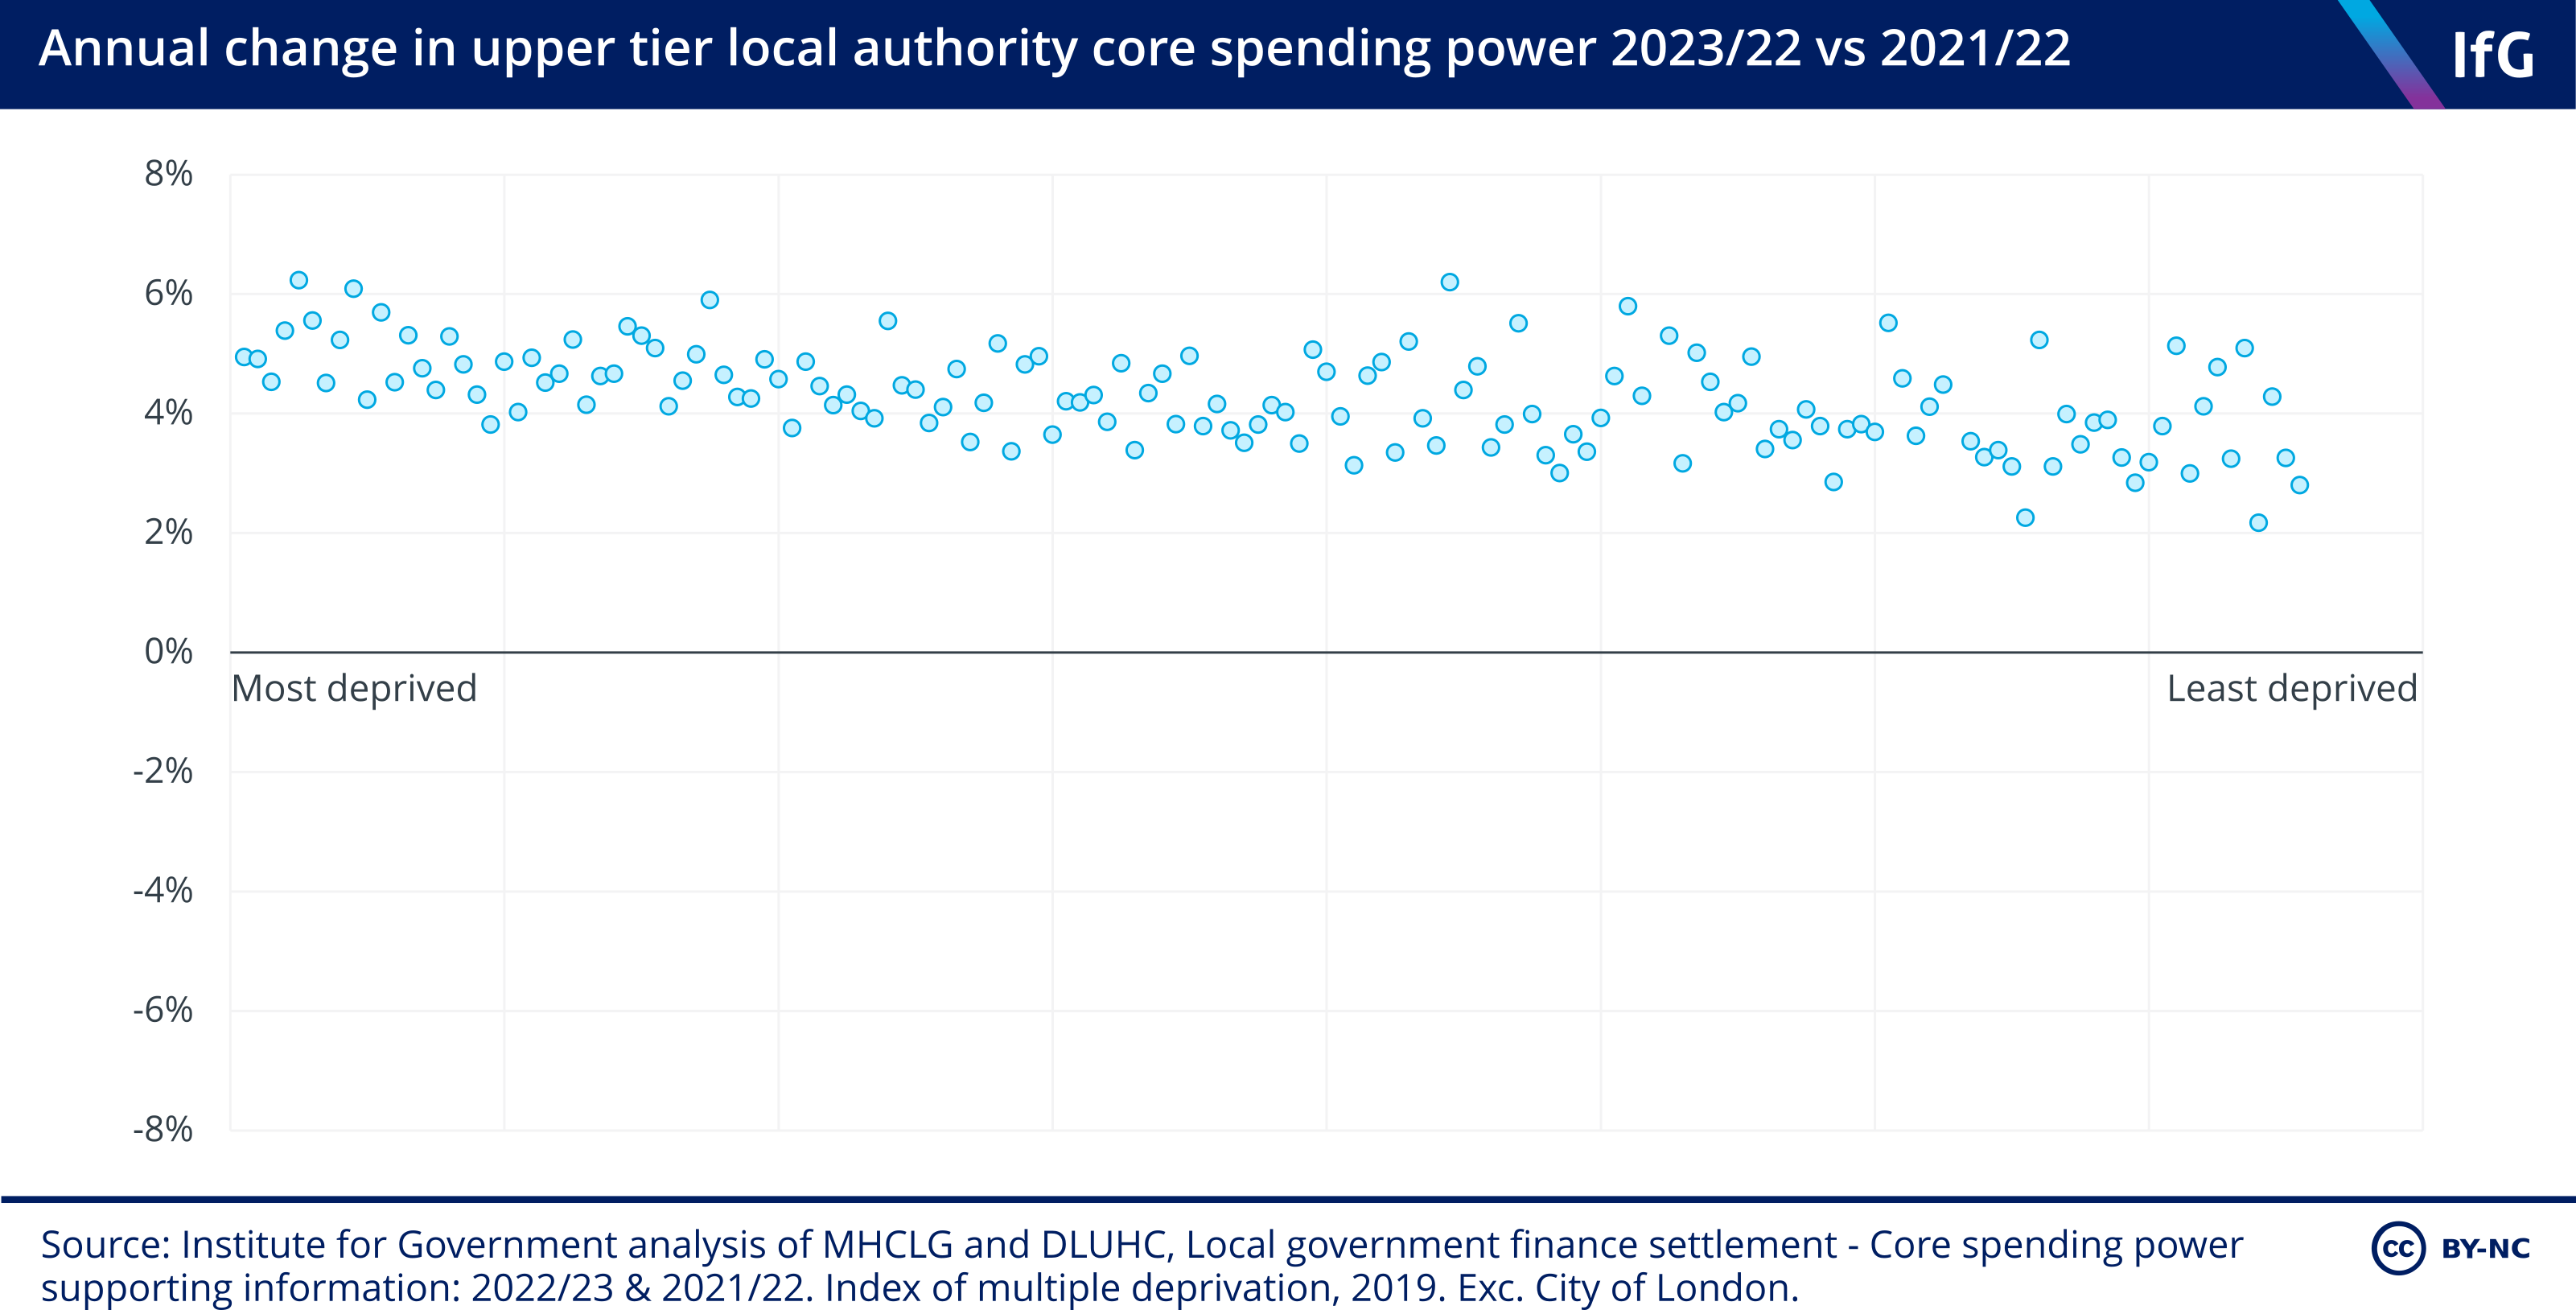 Annual change in upper tier local authority core spending power 2023/22 vs 2021/22